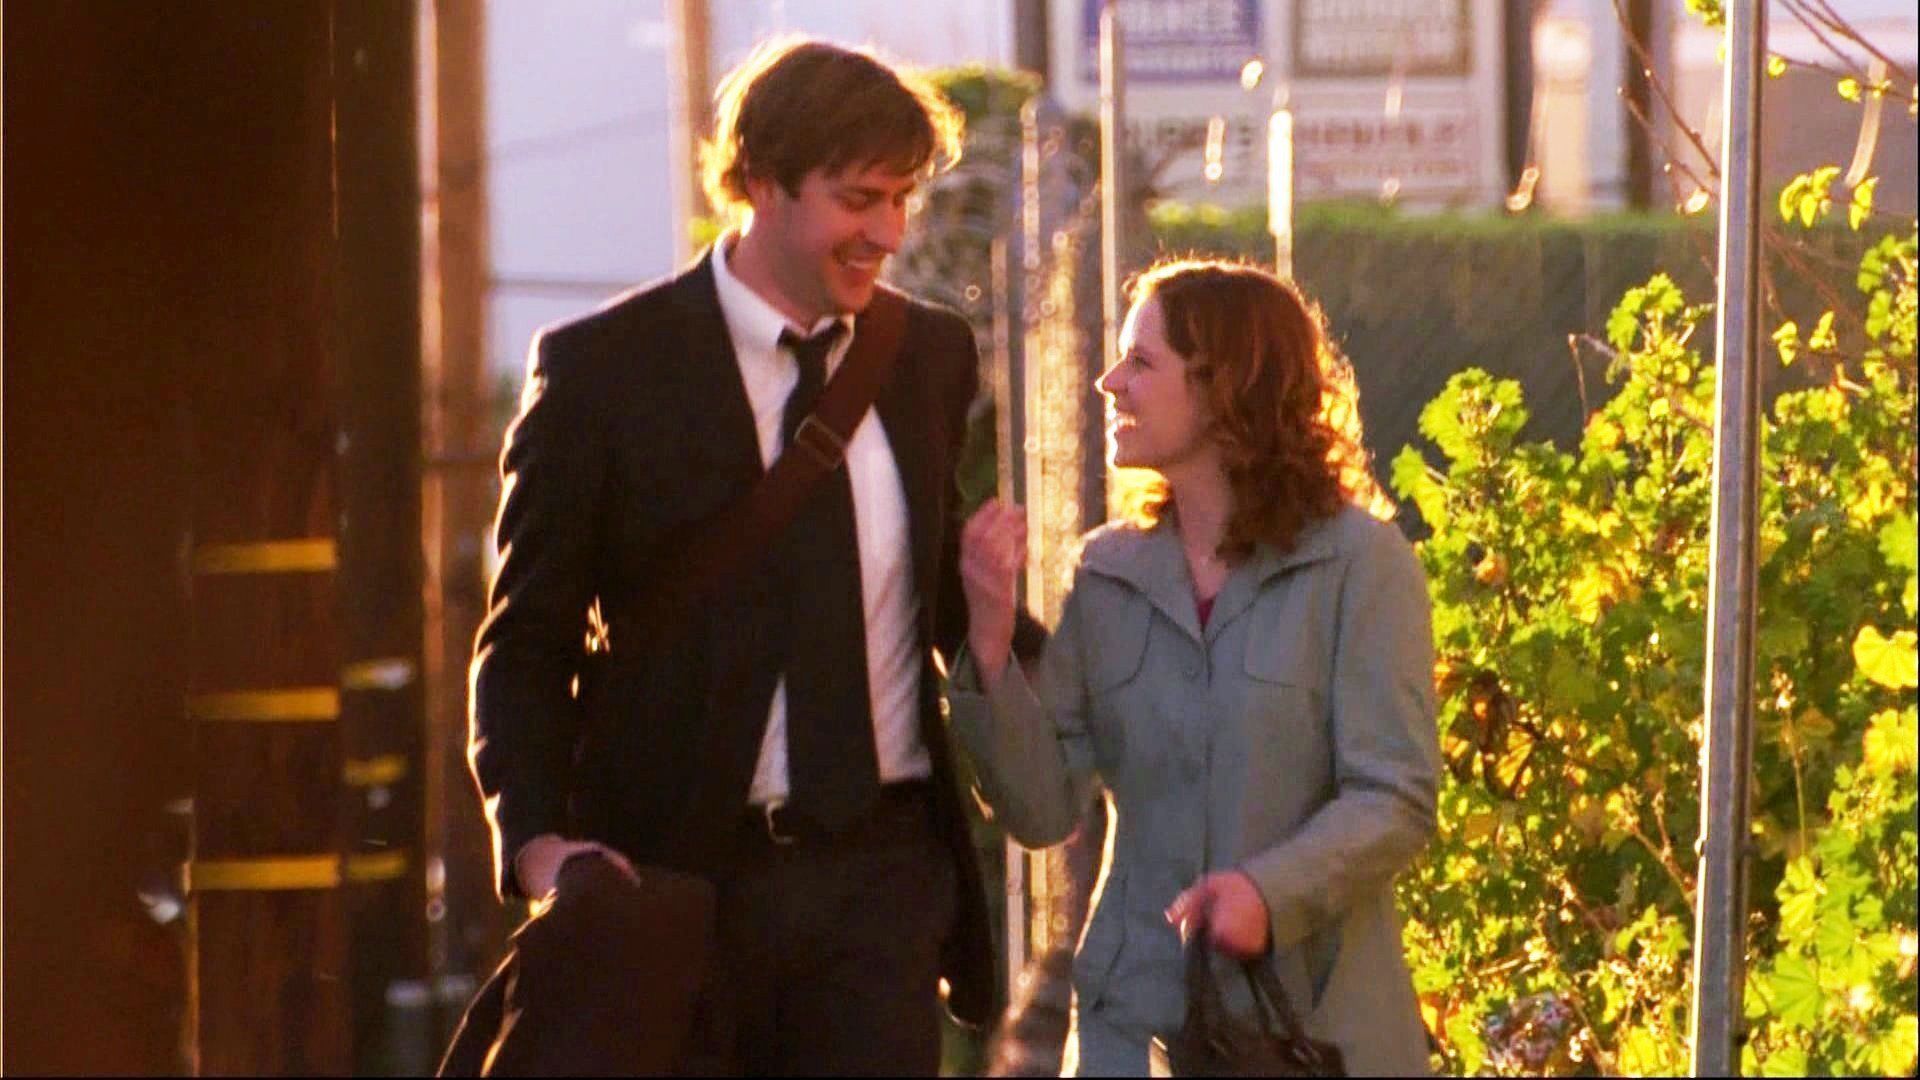 Jim & Pam (The Office) Couples Image